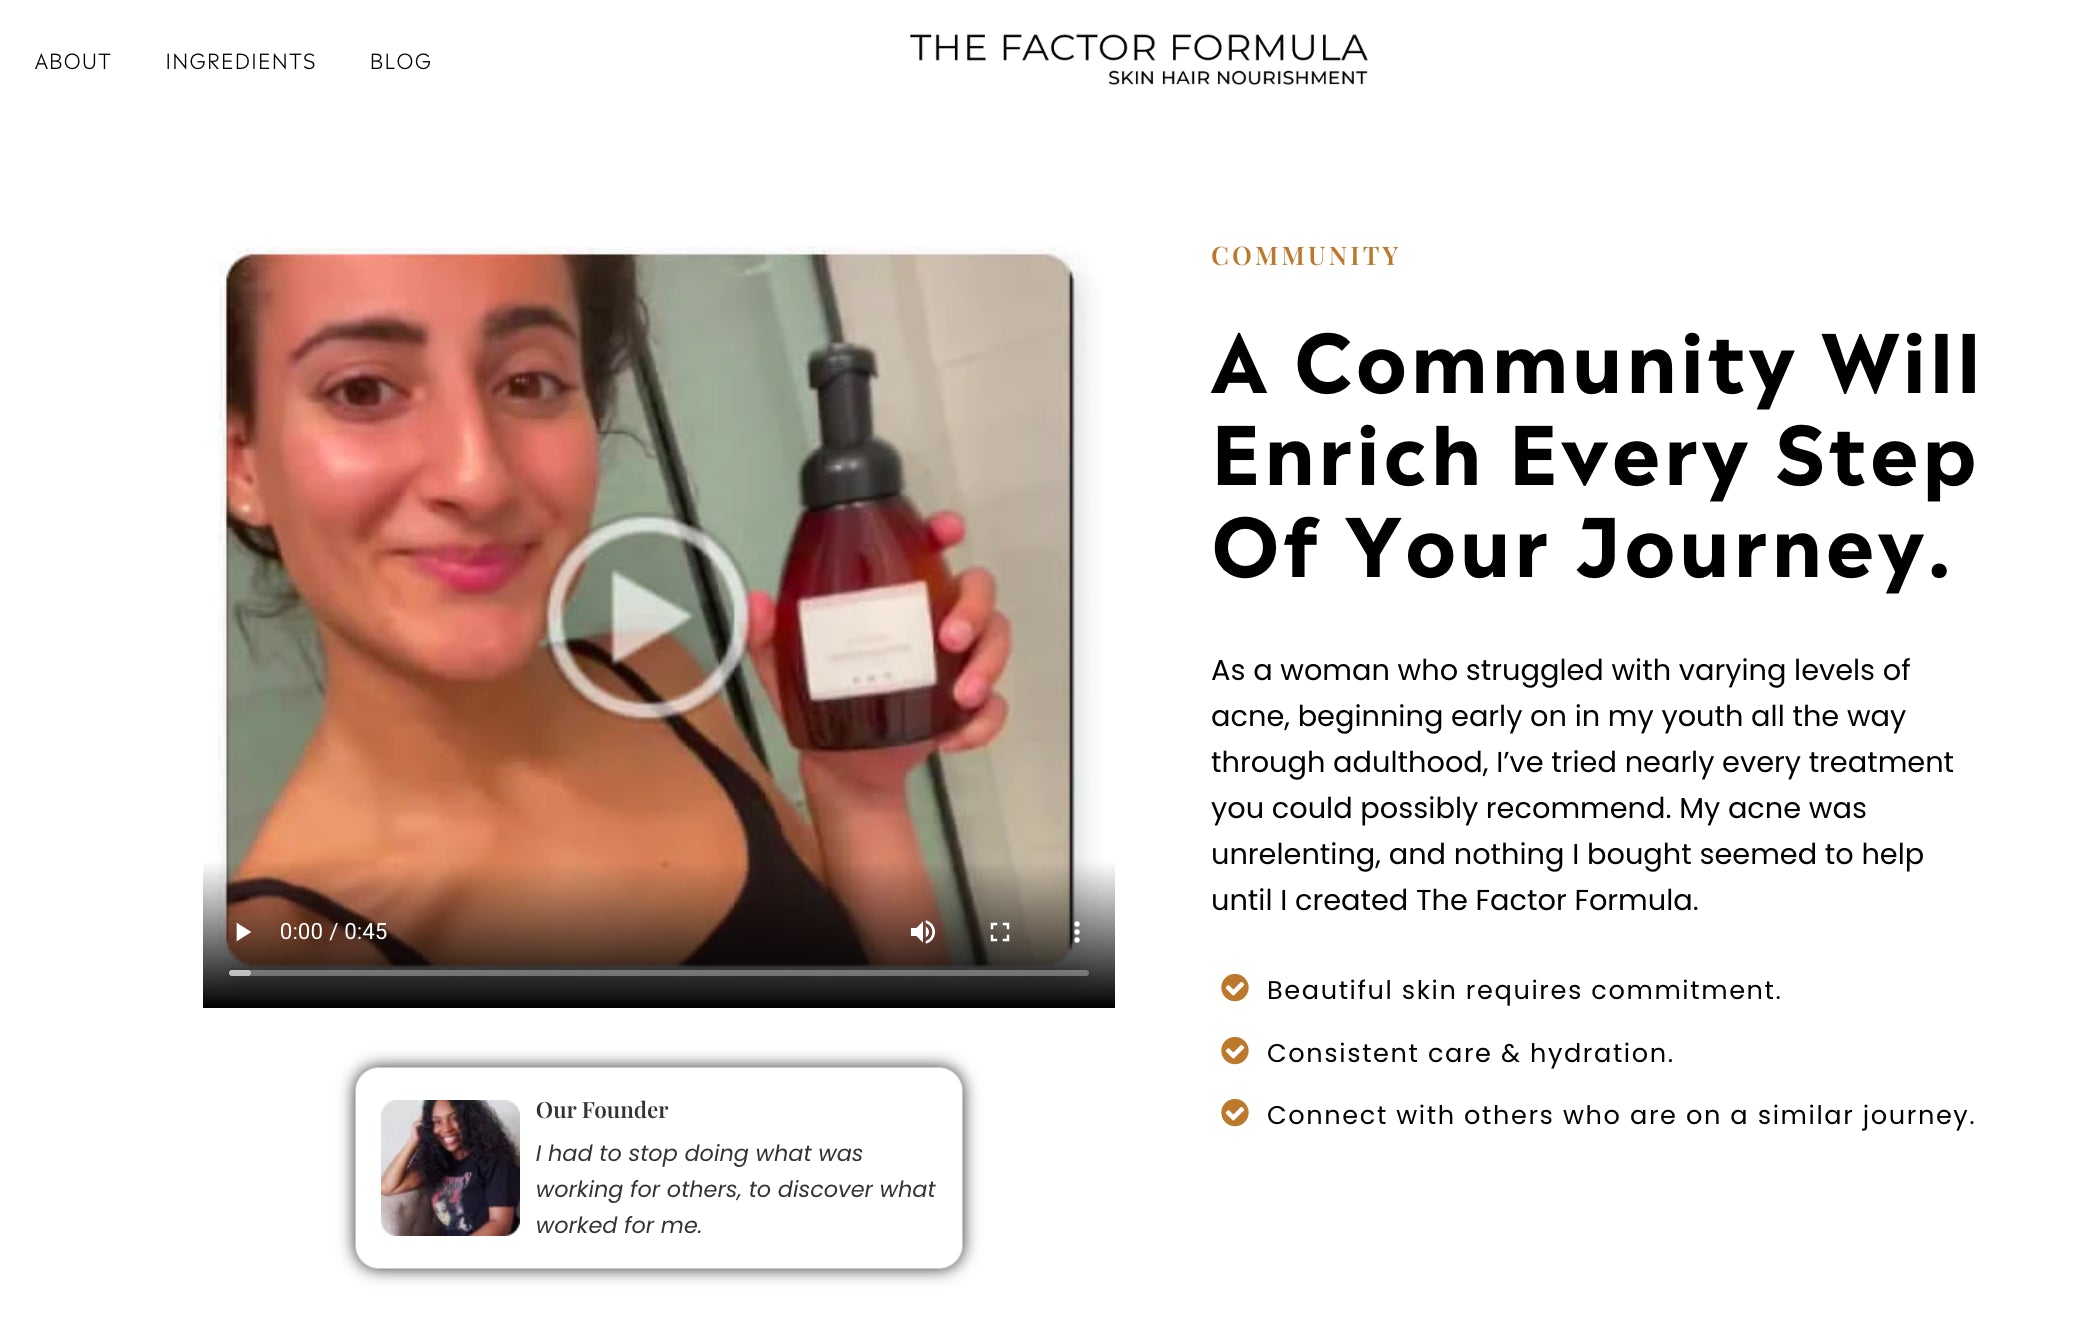 The Factor Formula's landing page